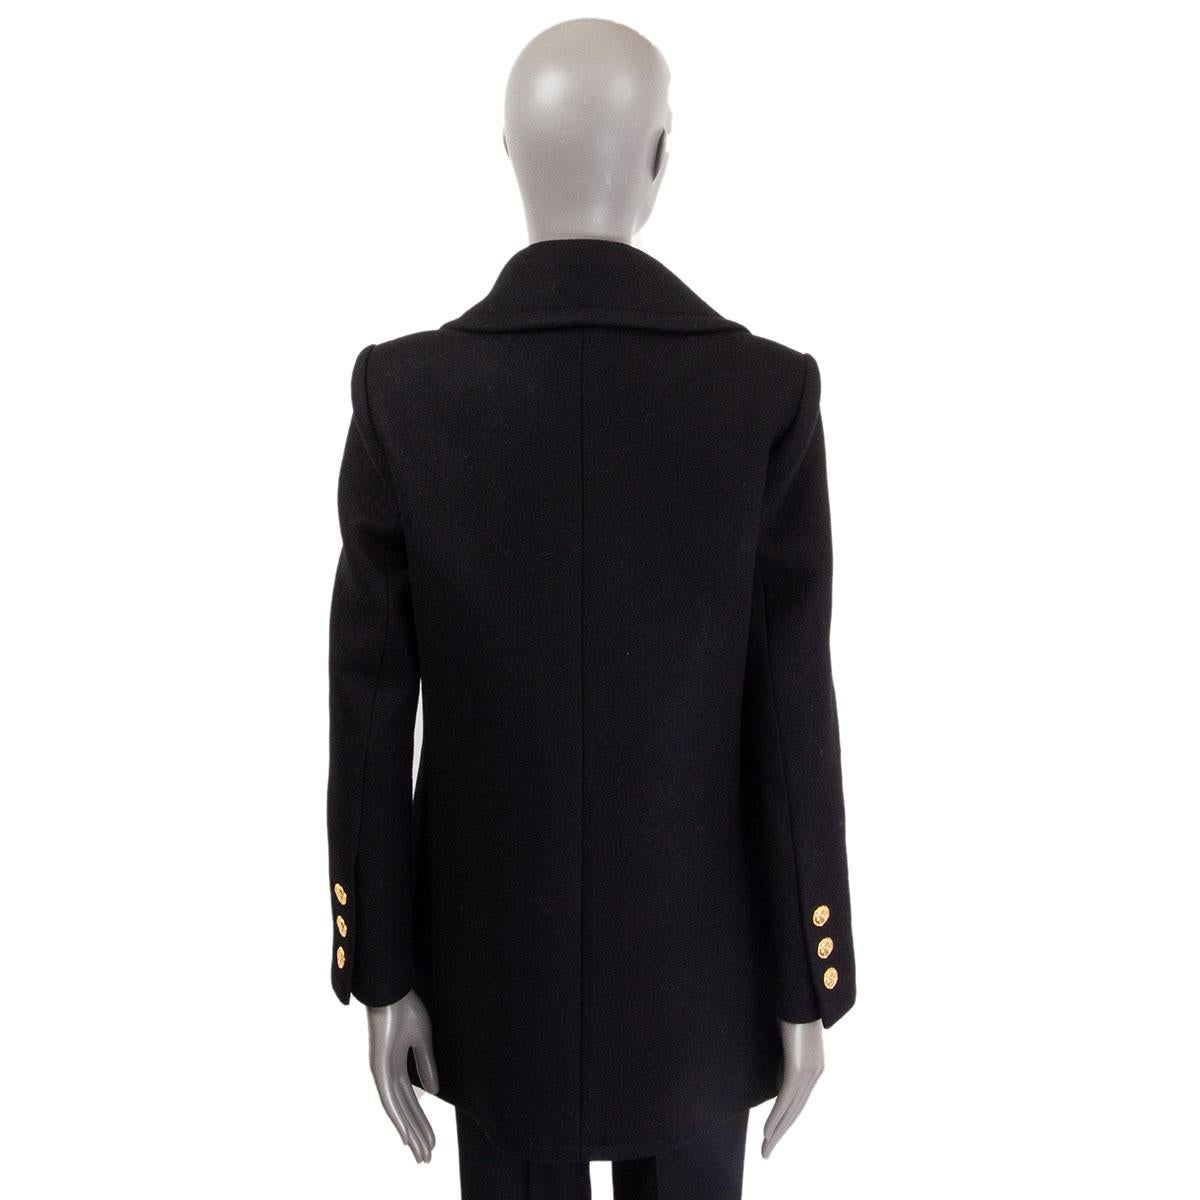 Women's CHANEL black cashmere ROME Double Breasted Peacoat Coat Jacket 36 XS